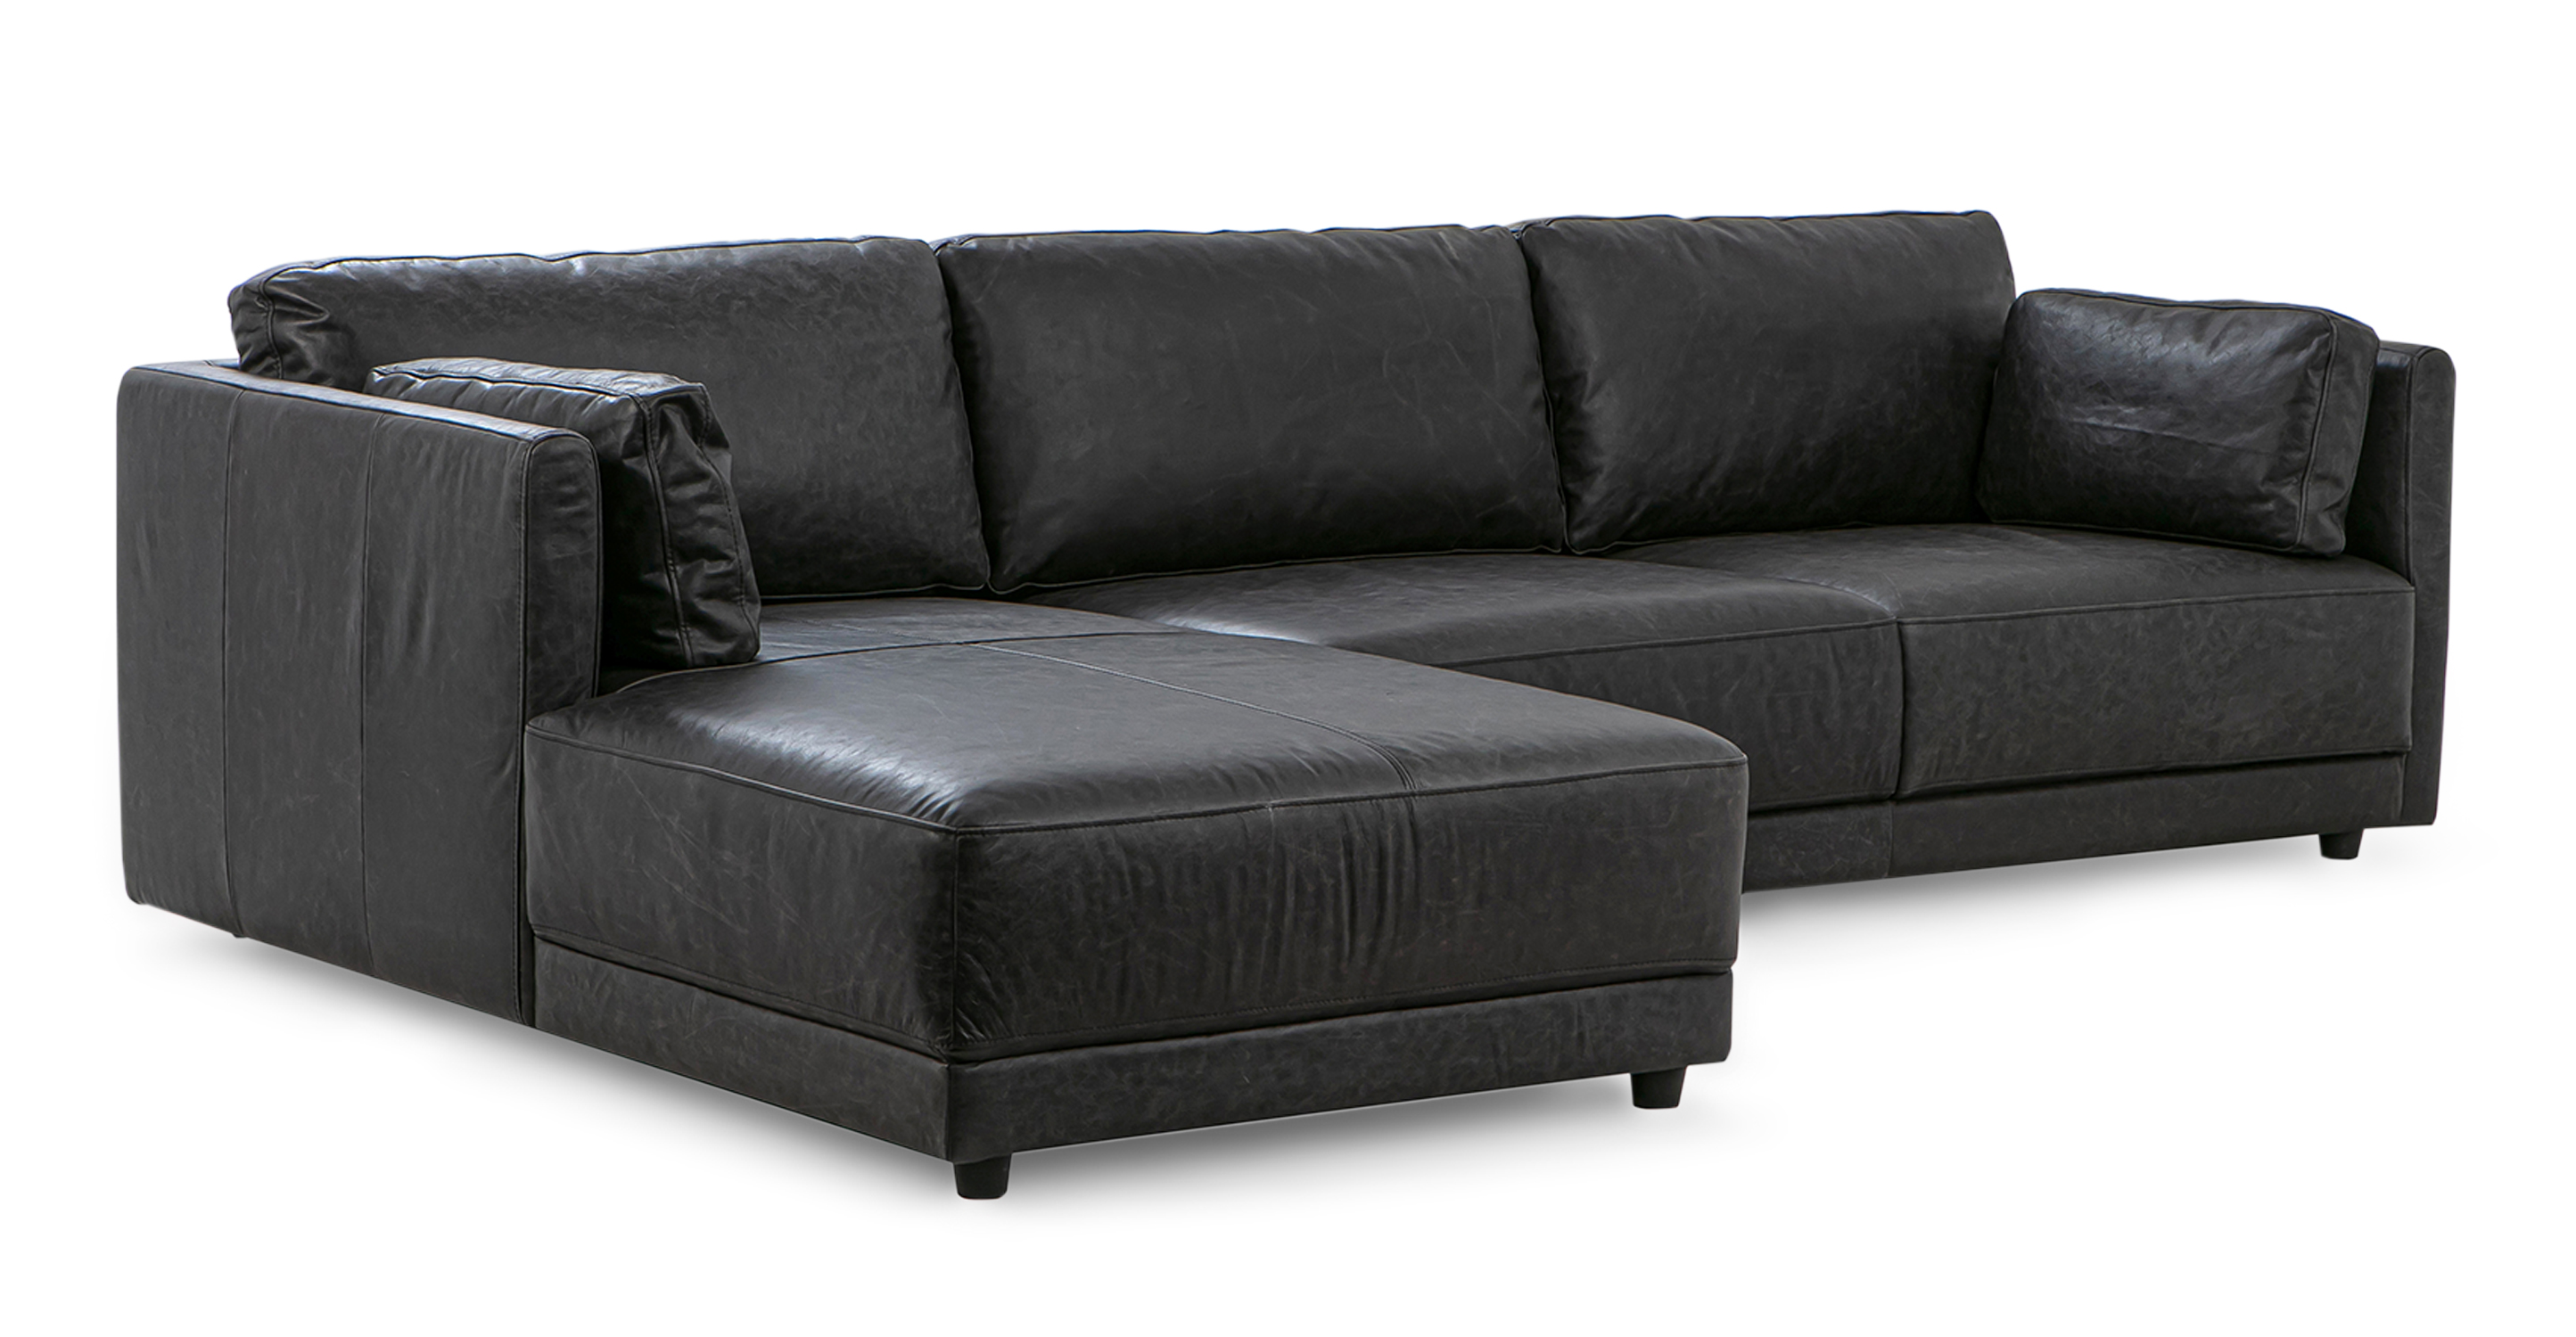 Ebony Domus left sectional is a floor sectional with a chaise on the left (when facing the sectional) and a sofa option on the right. This sofa has removable back cushions, low profile arms, and is 100% upholstered. The style is modern and minimalist.